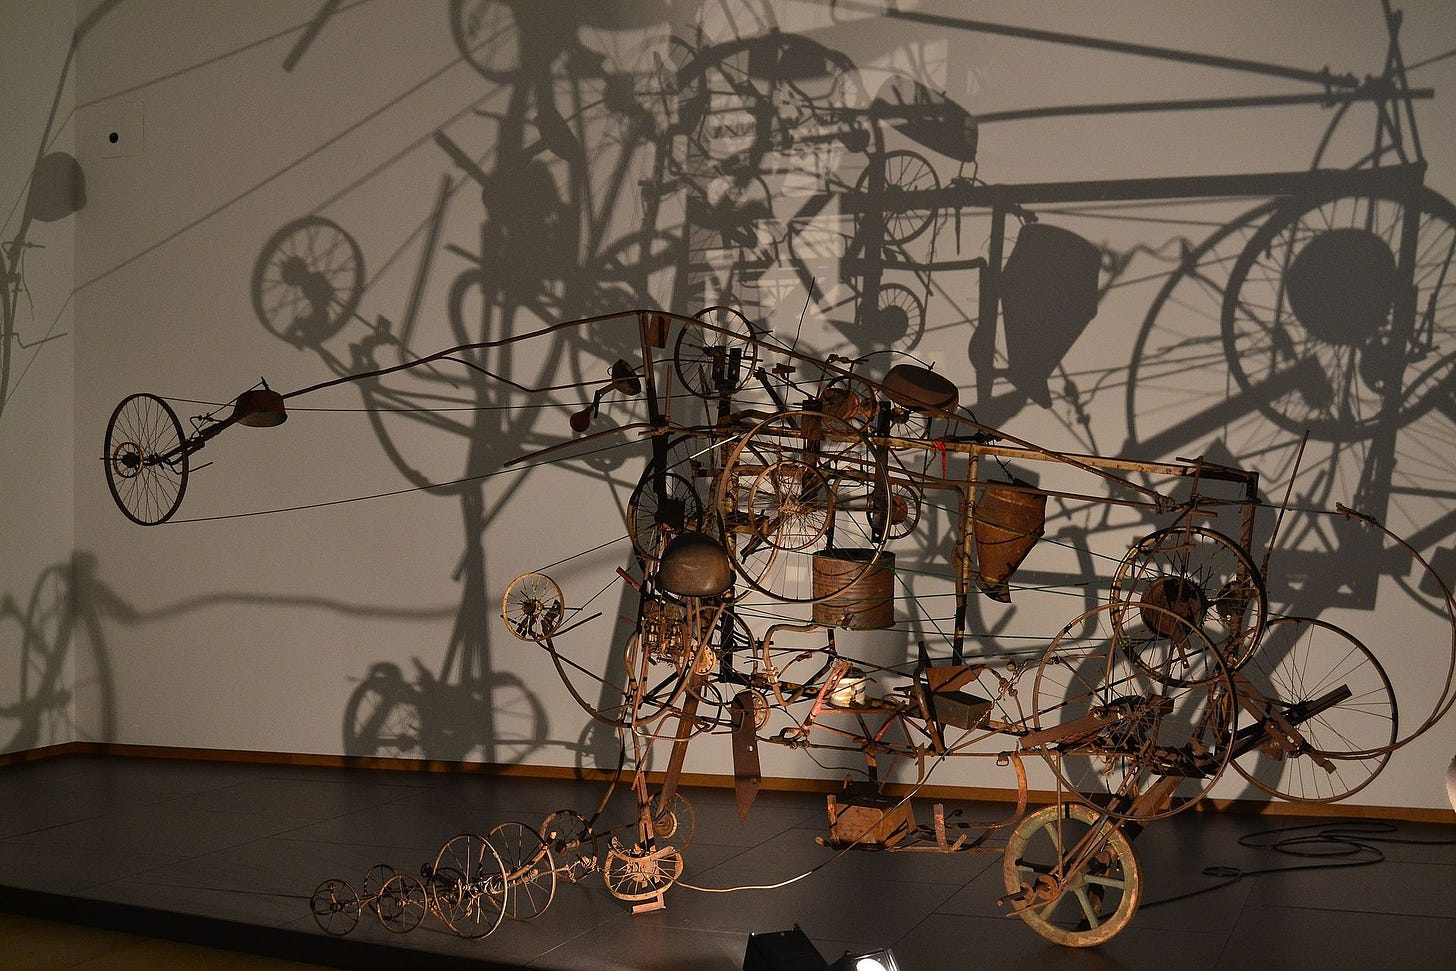 Tinguely, Machines - Le Transport, early 1960s; scrap metal components